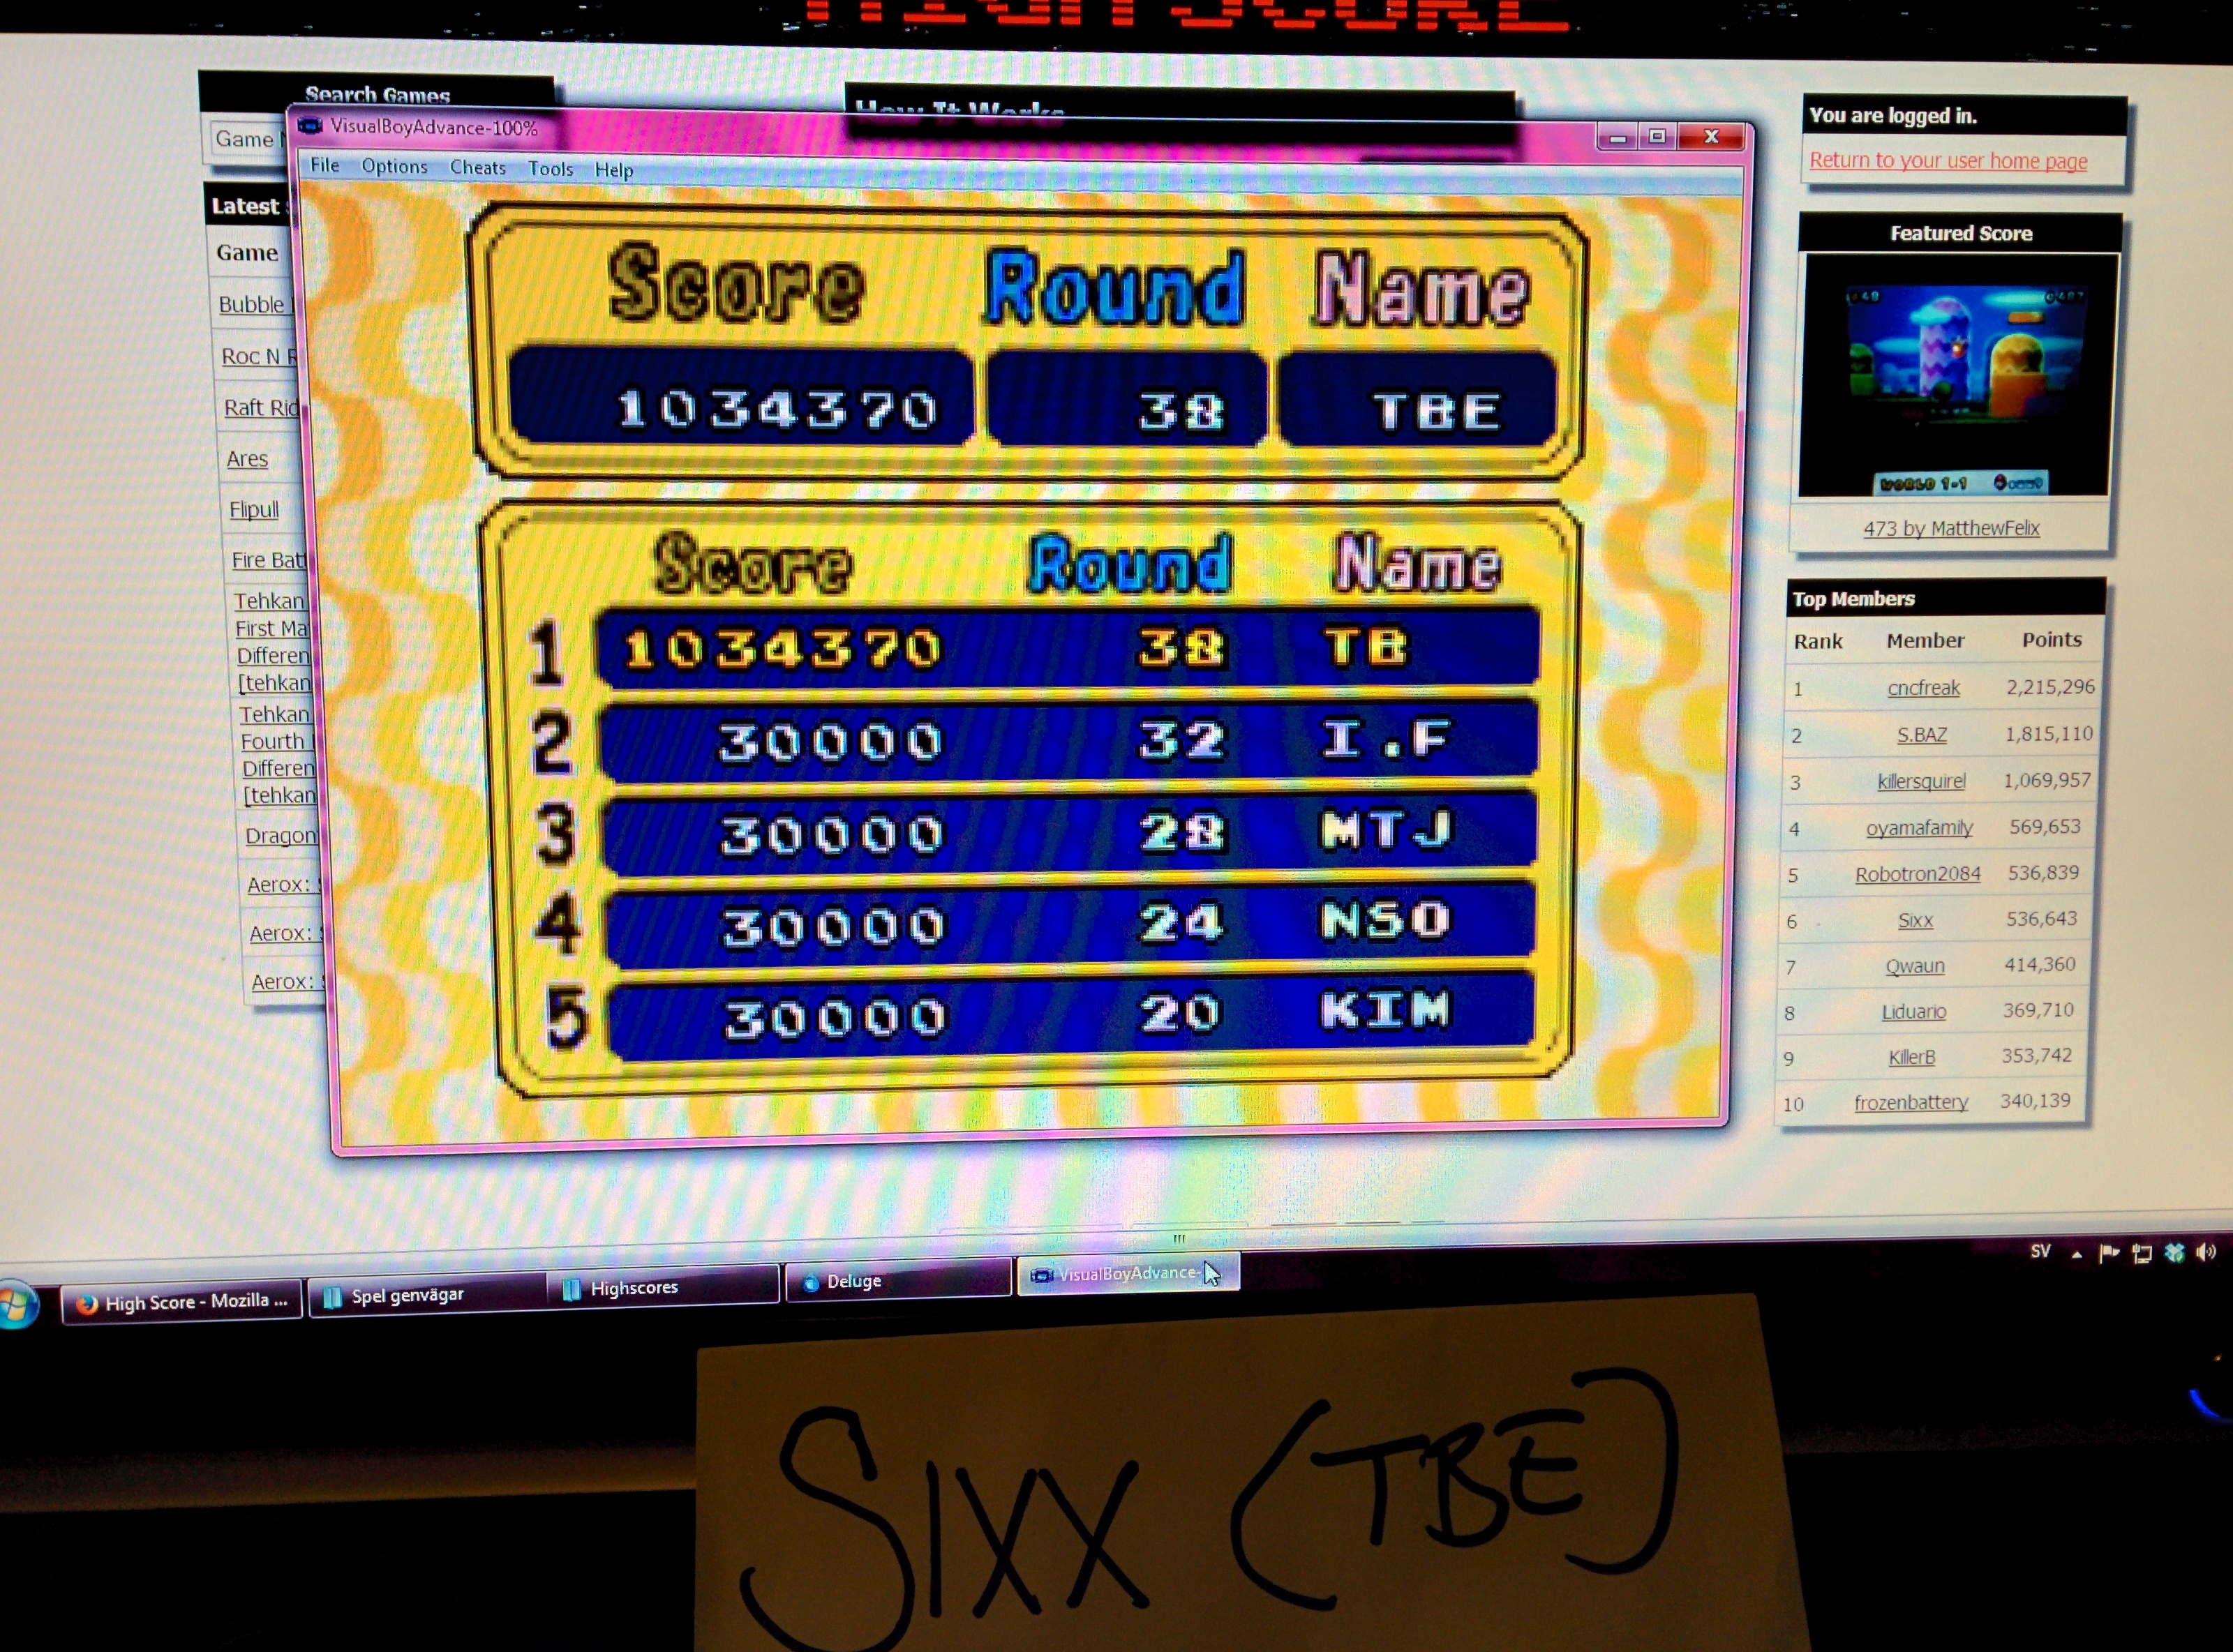 Sixx: Bubble Bobble: New (GBA Emulated) 1,034,370 points on 2014-05-06 16:24:06